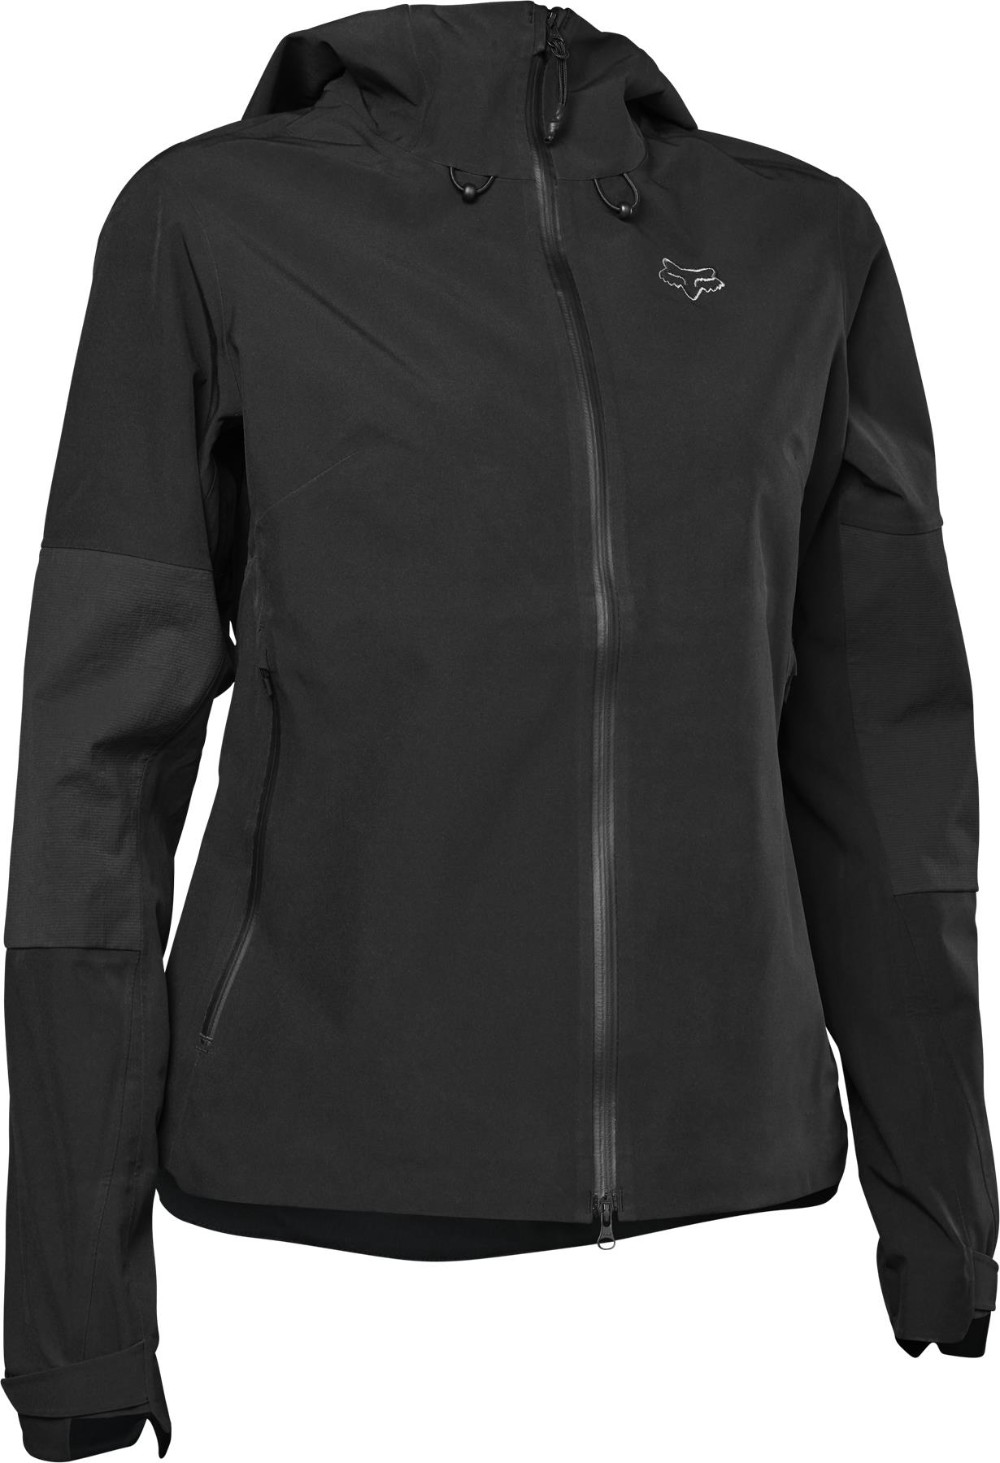 Defend 3L Water Womens MTB Cycling Jacket image 0